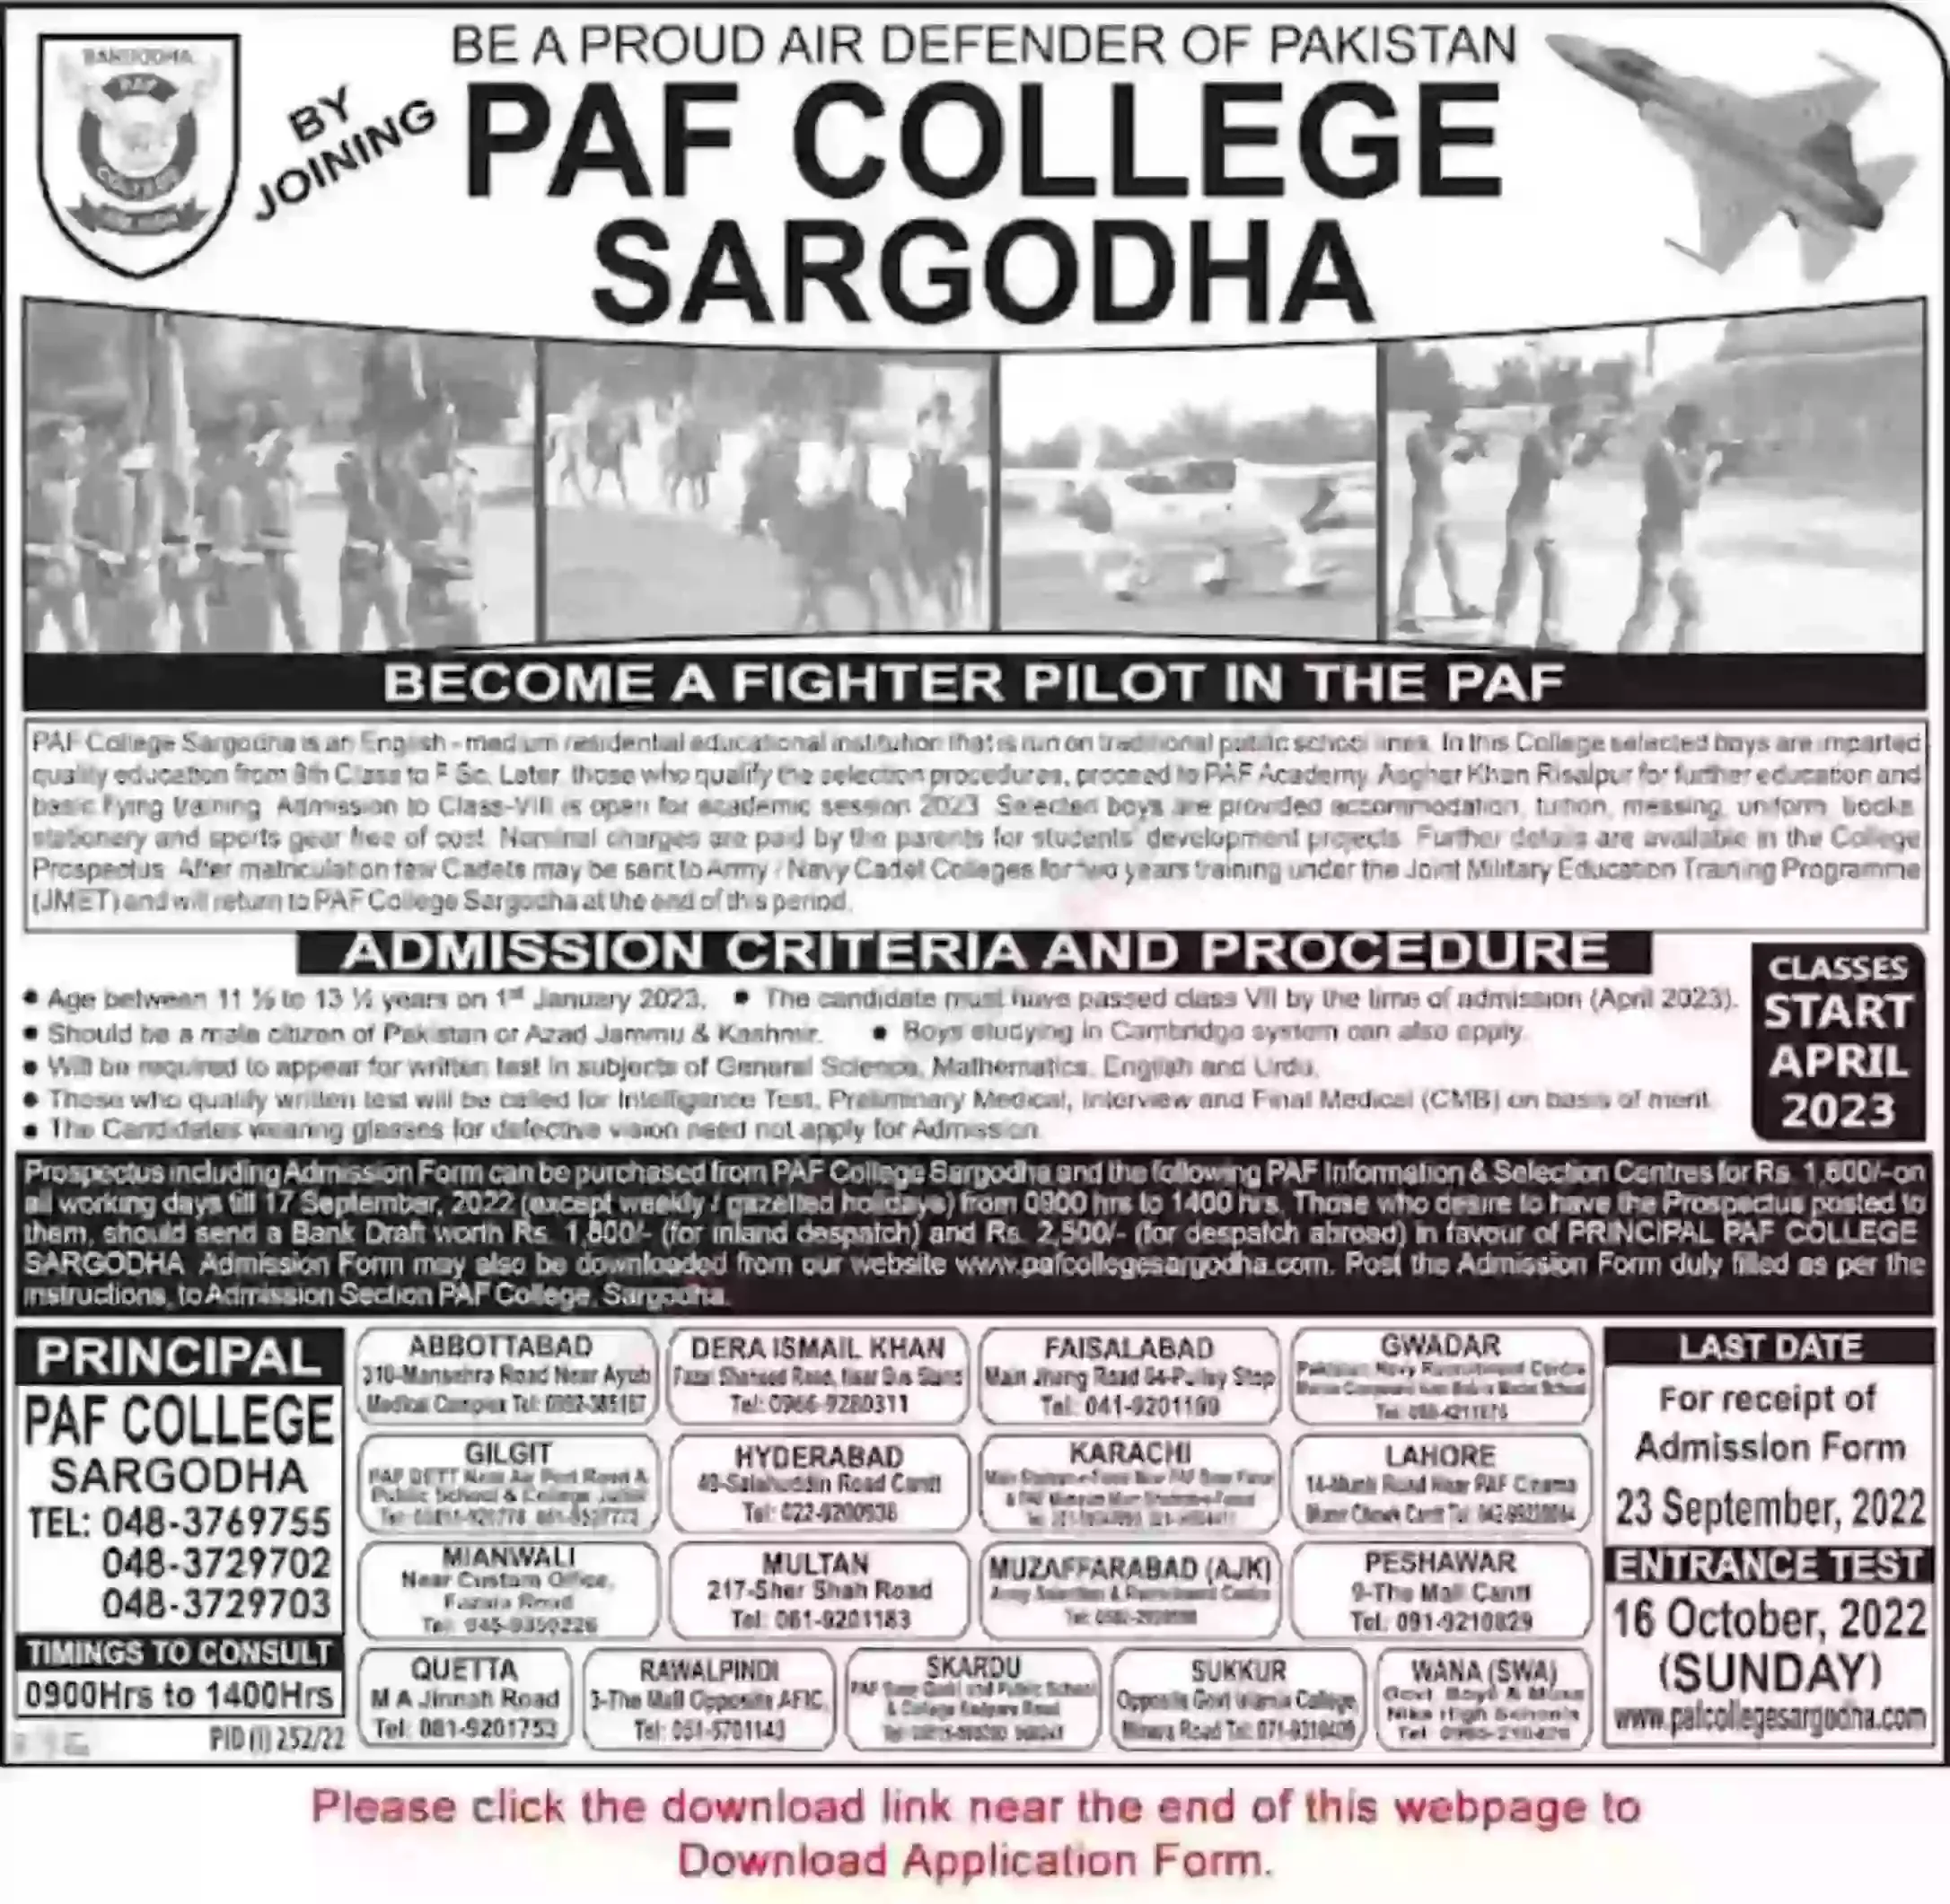 Latest Pakistan Airforce PAF Admissions In 2022